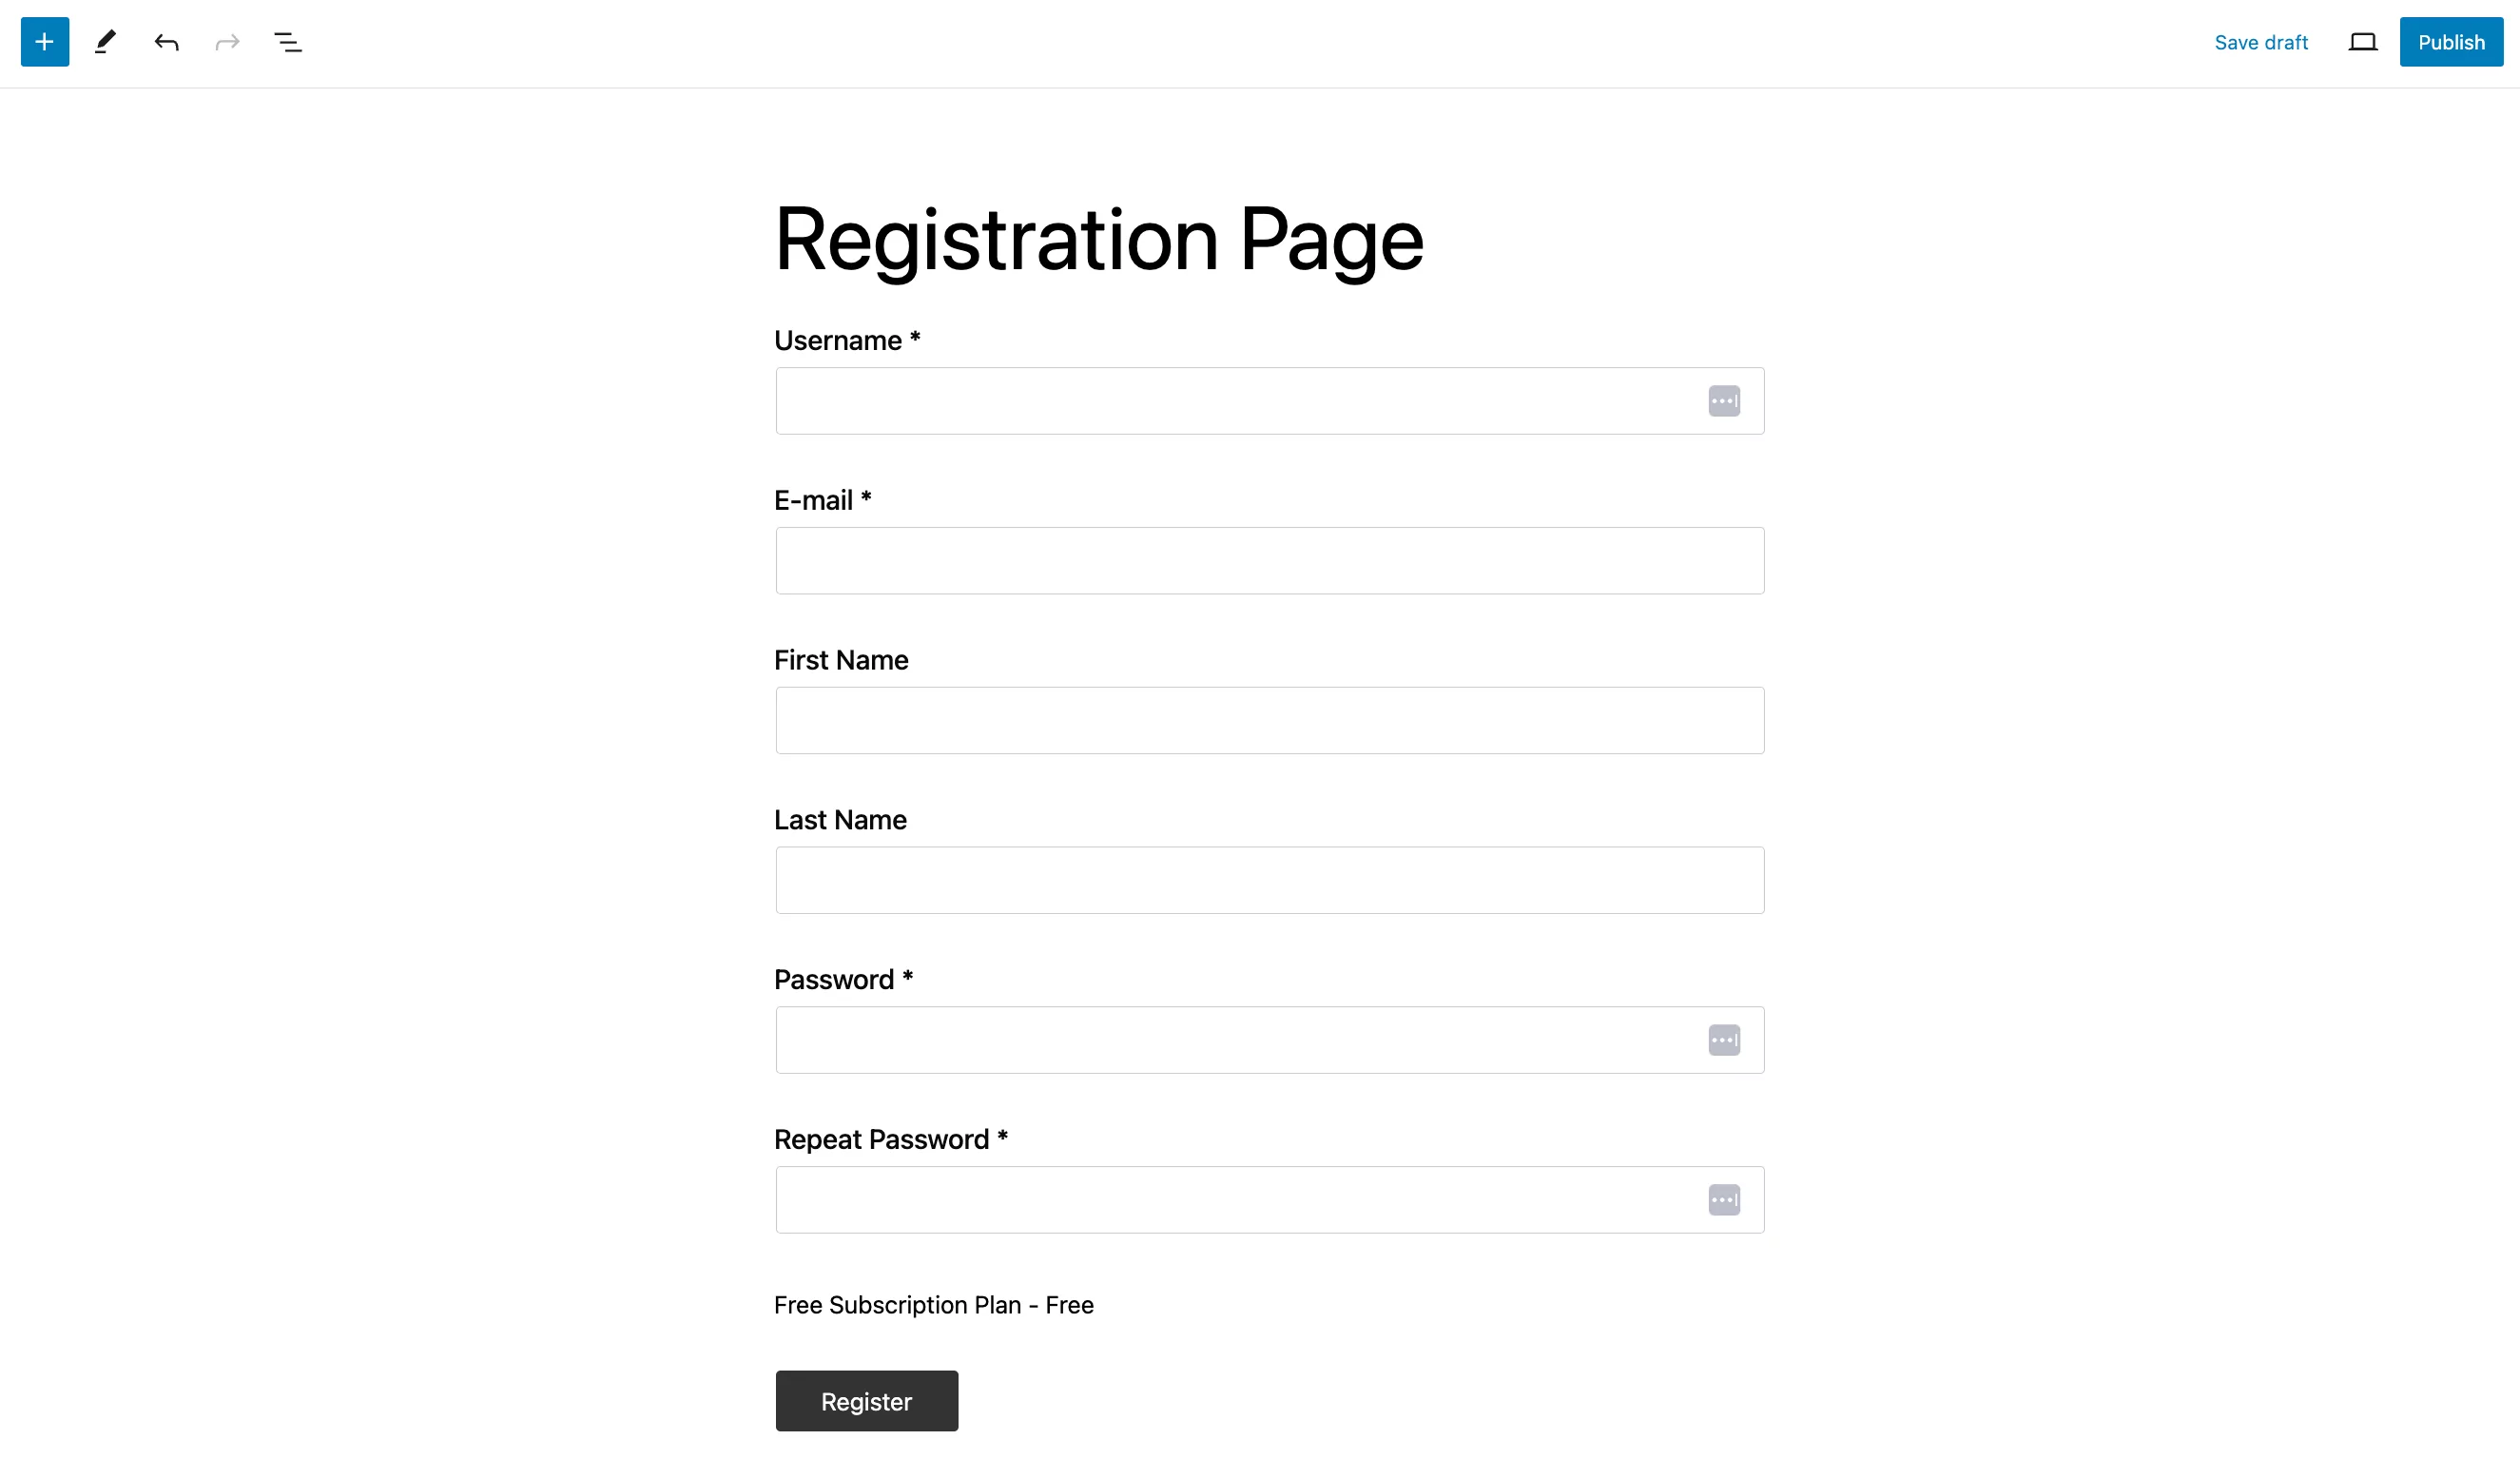 A Registration page with a free subscription plan option